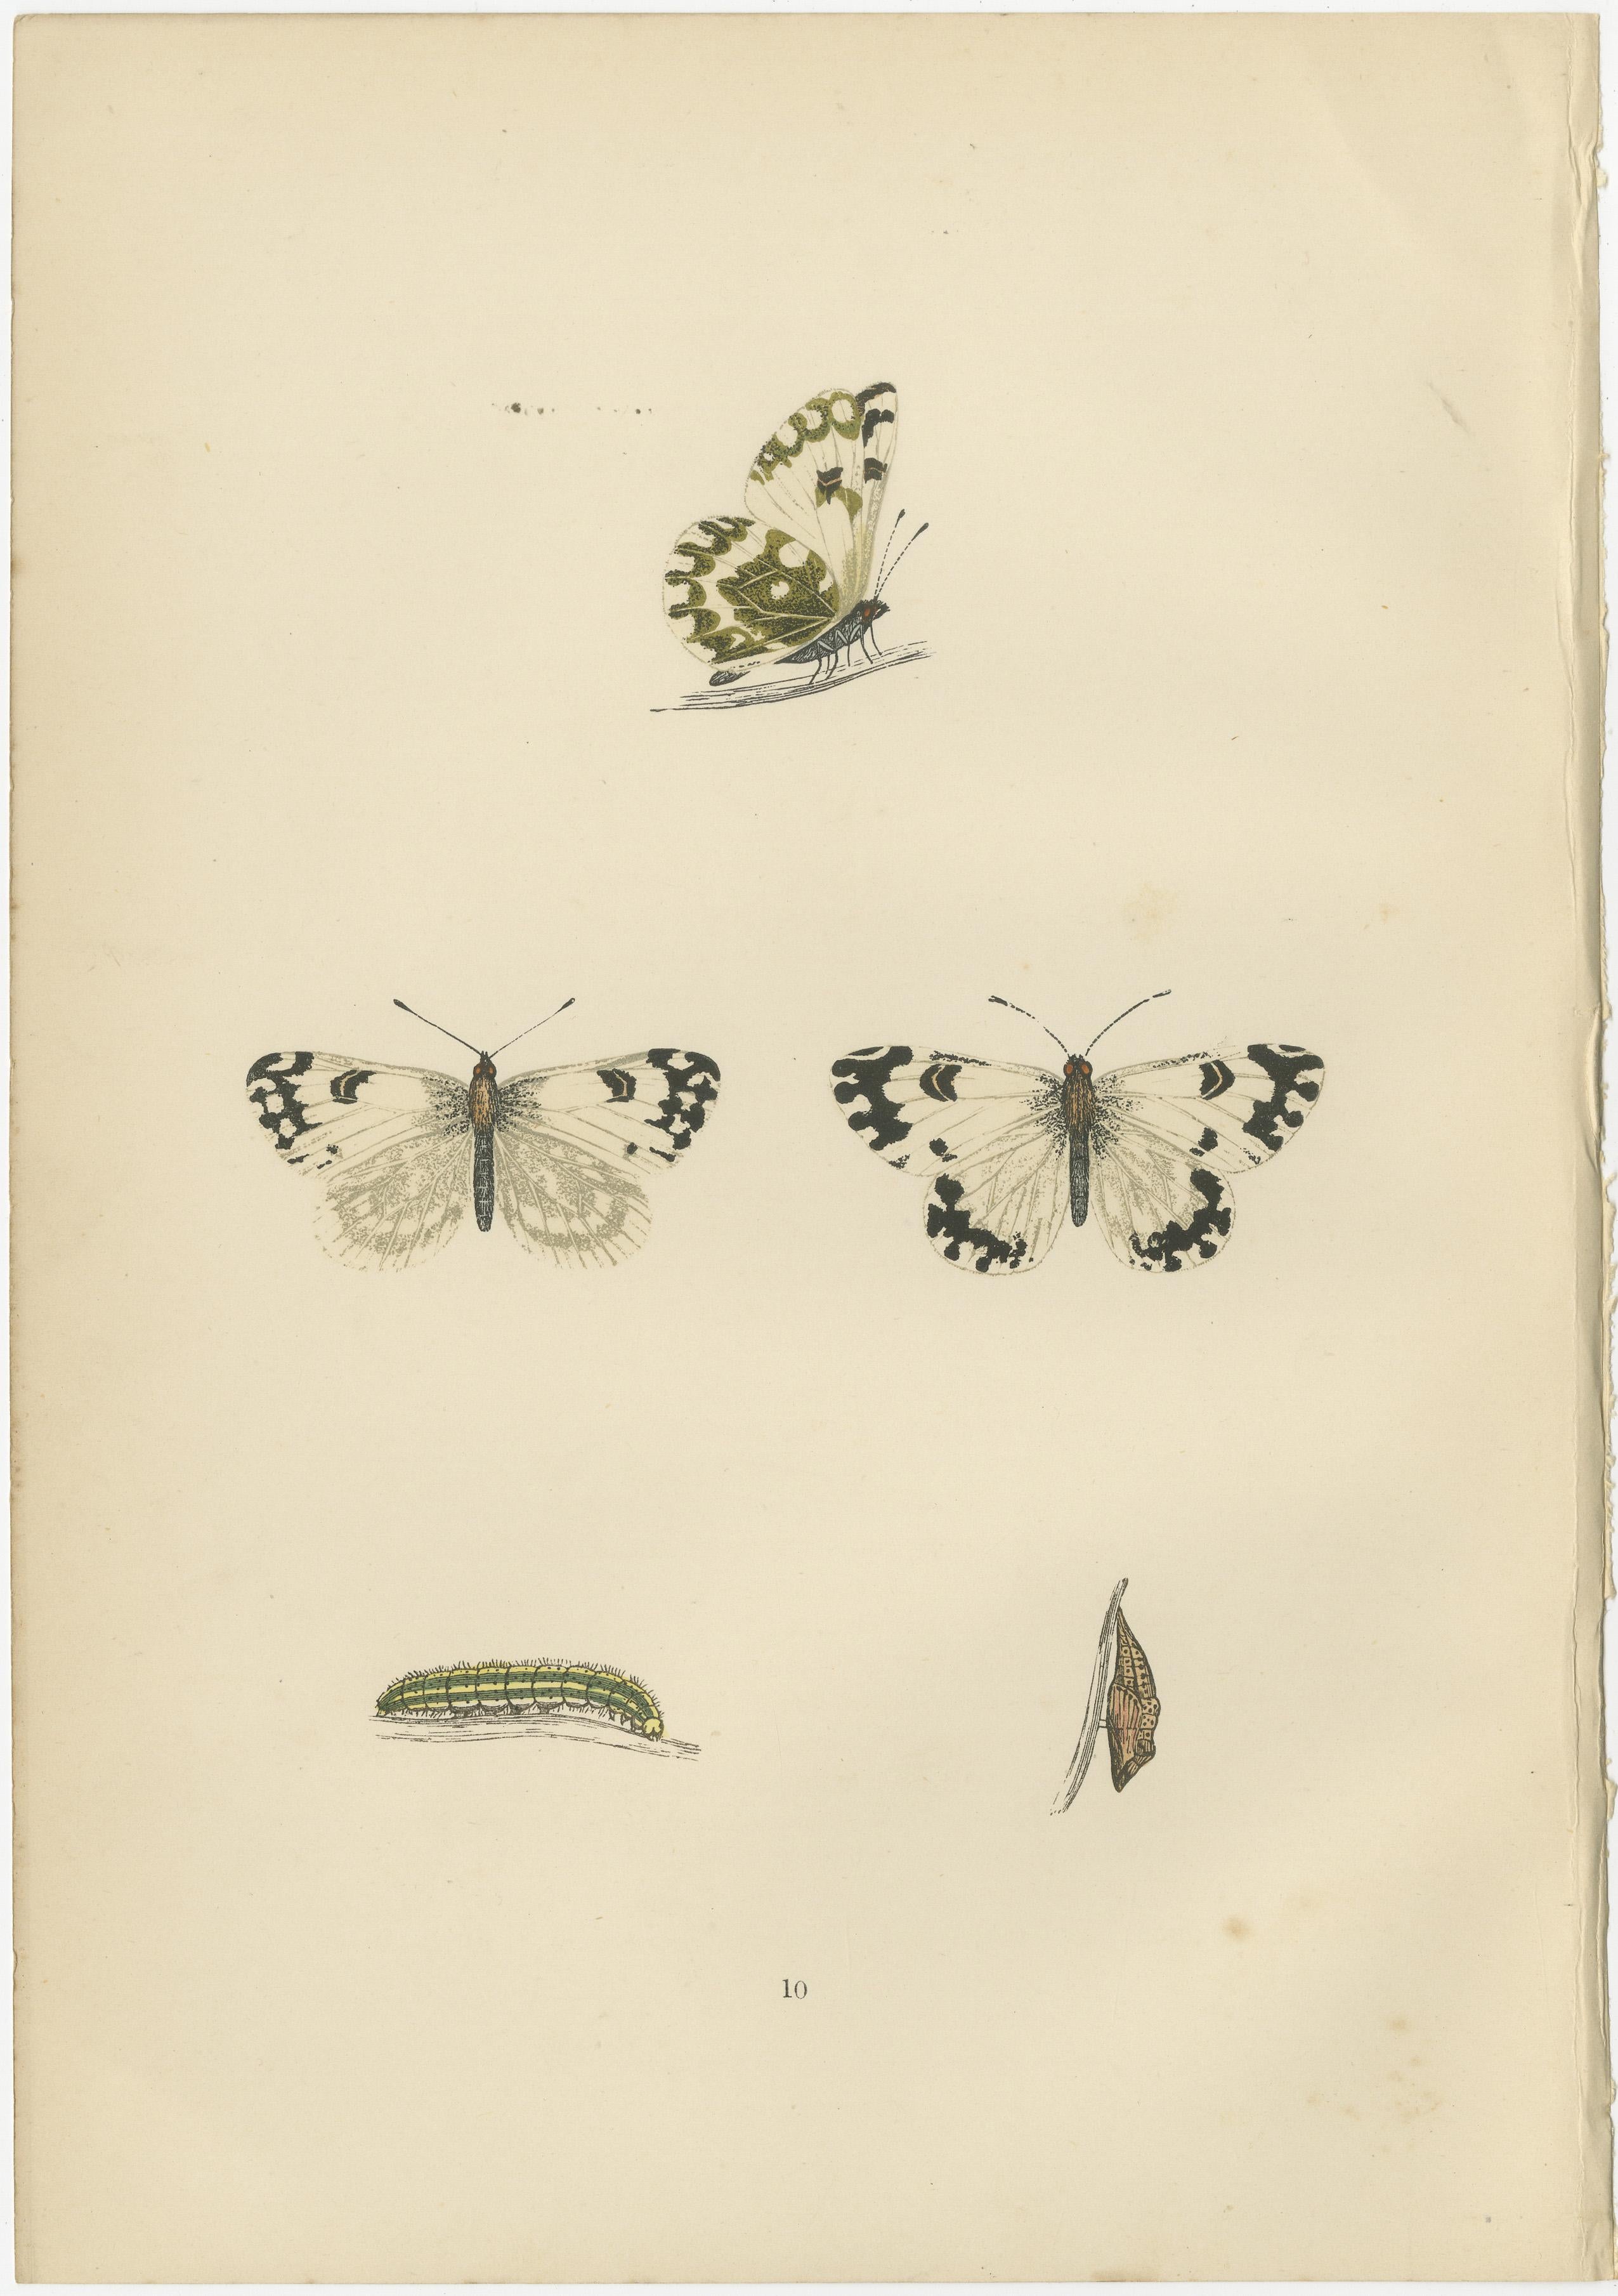 The original antique and hand-colored butterflies prints are a fascinating selection from the British Isles, each with distinctive features:

1. **Chequered White (Selenia tetralunaria)** – Also known as the Comma, this butterfly is not typically